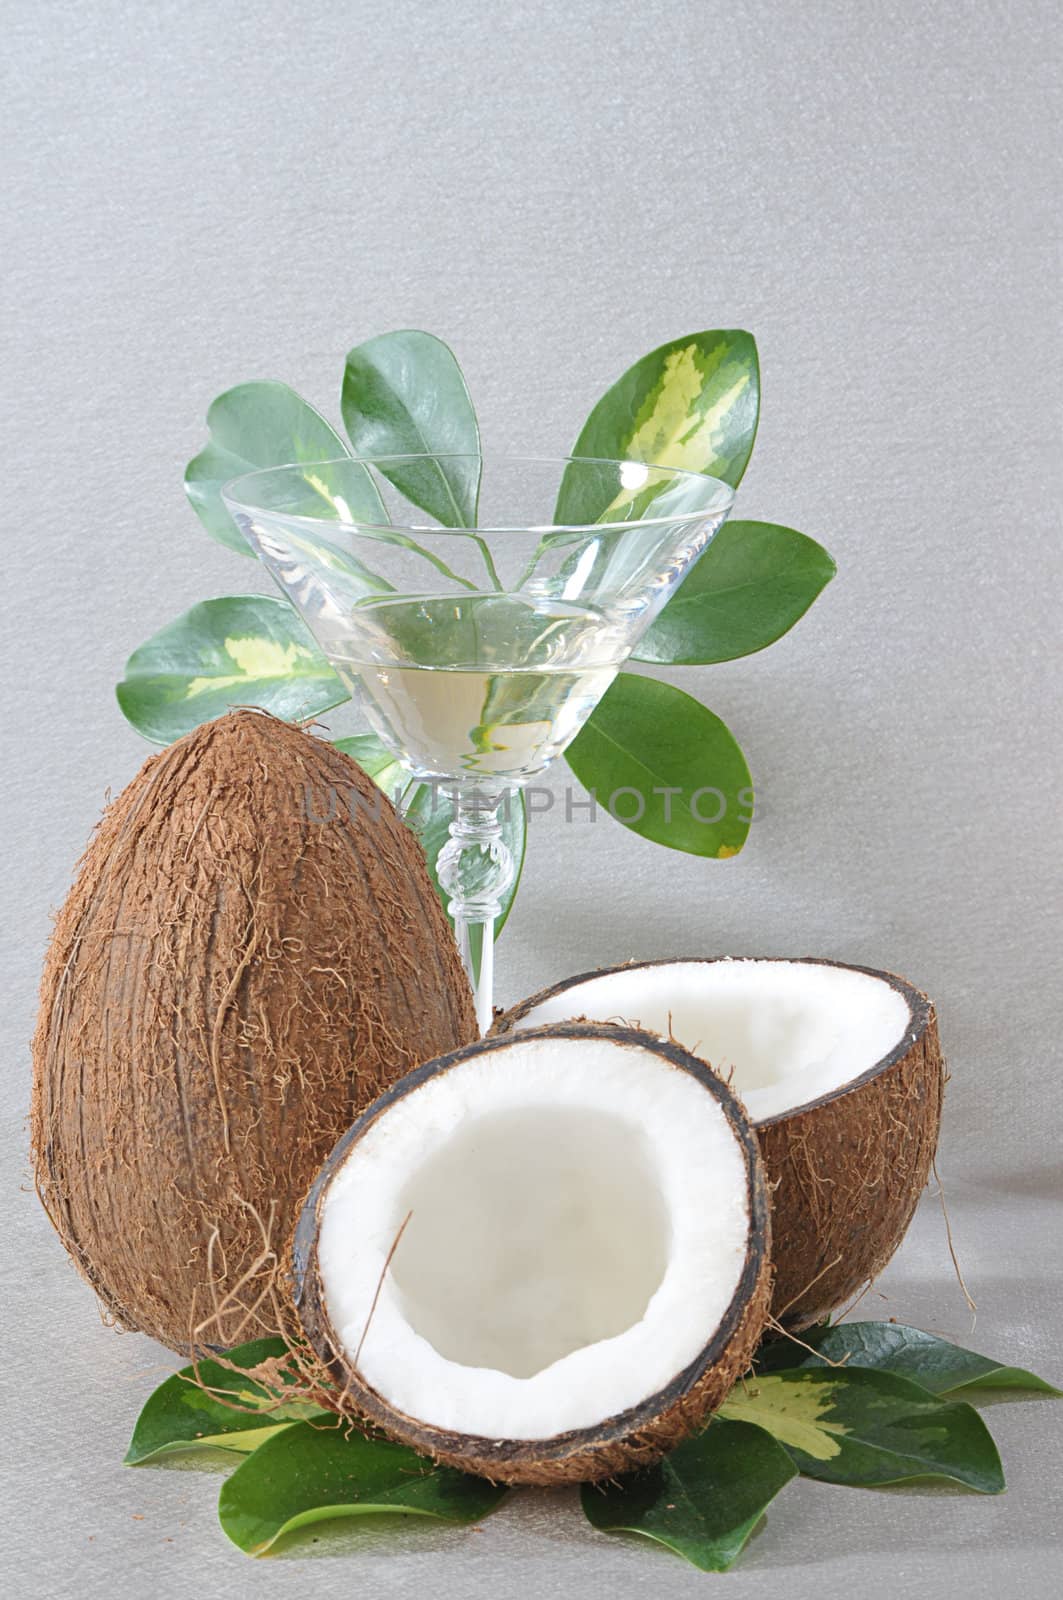 Coconut and glass of wine by dyoma